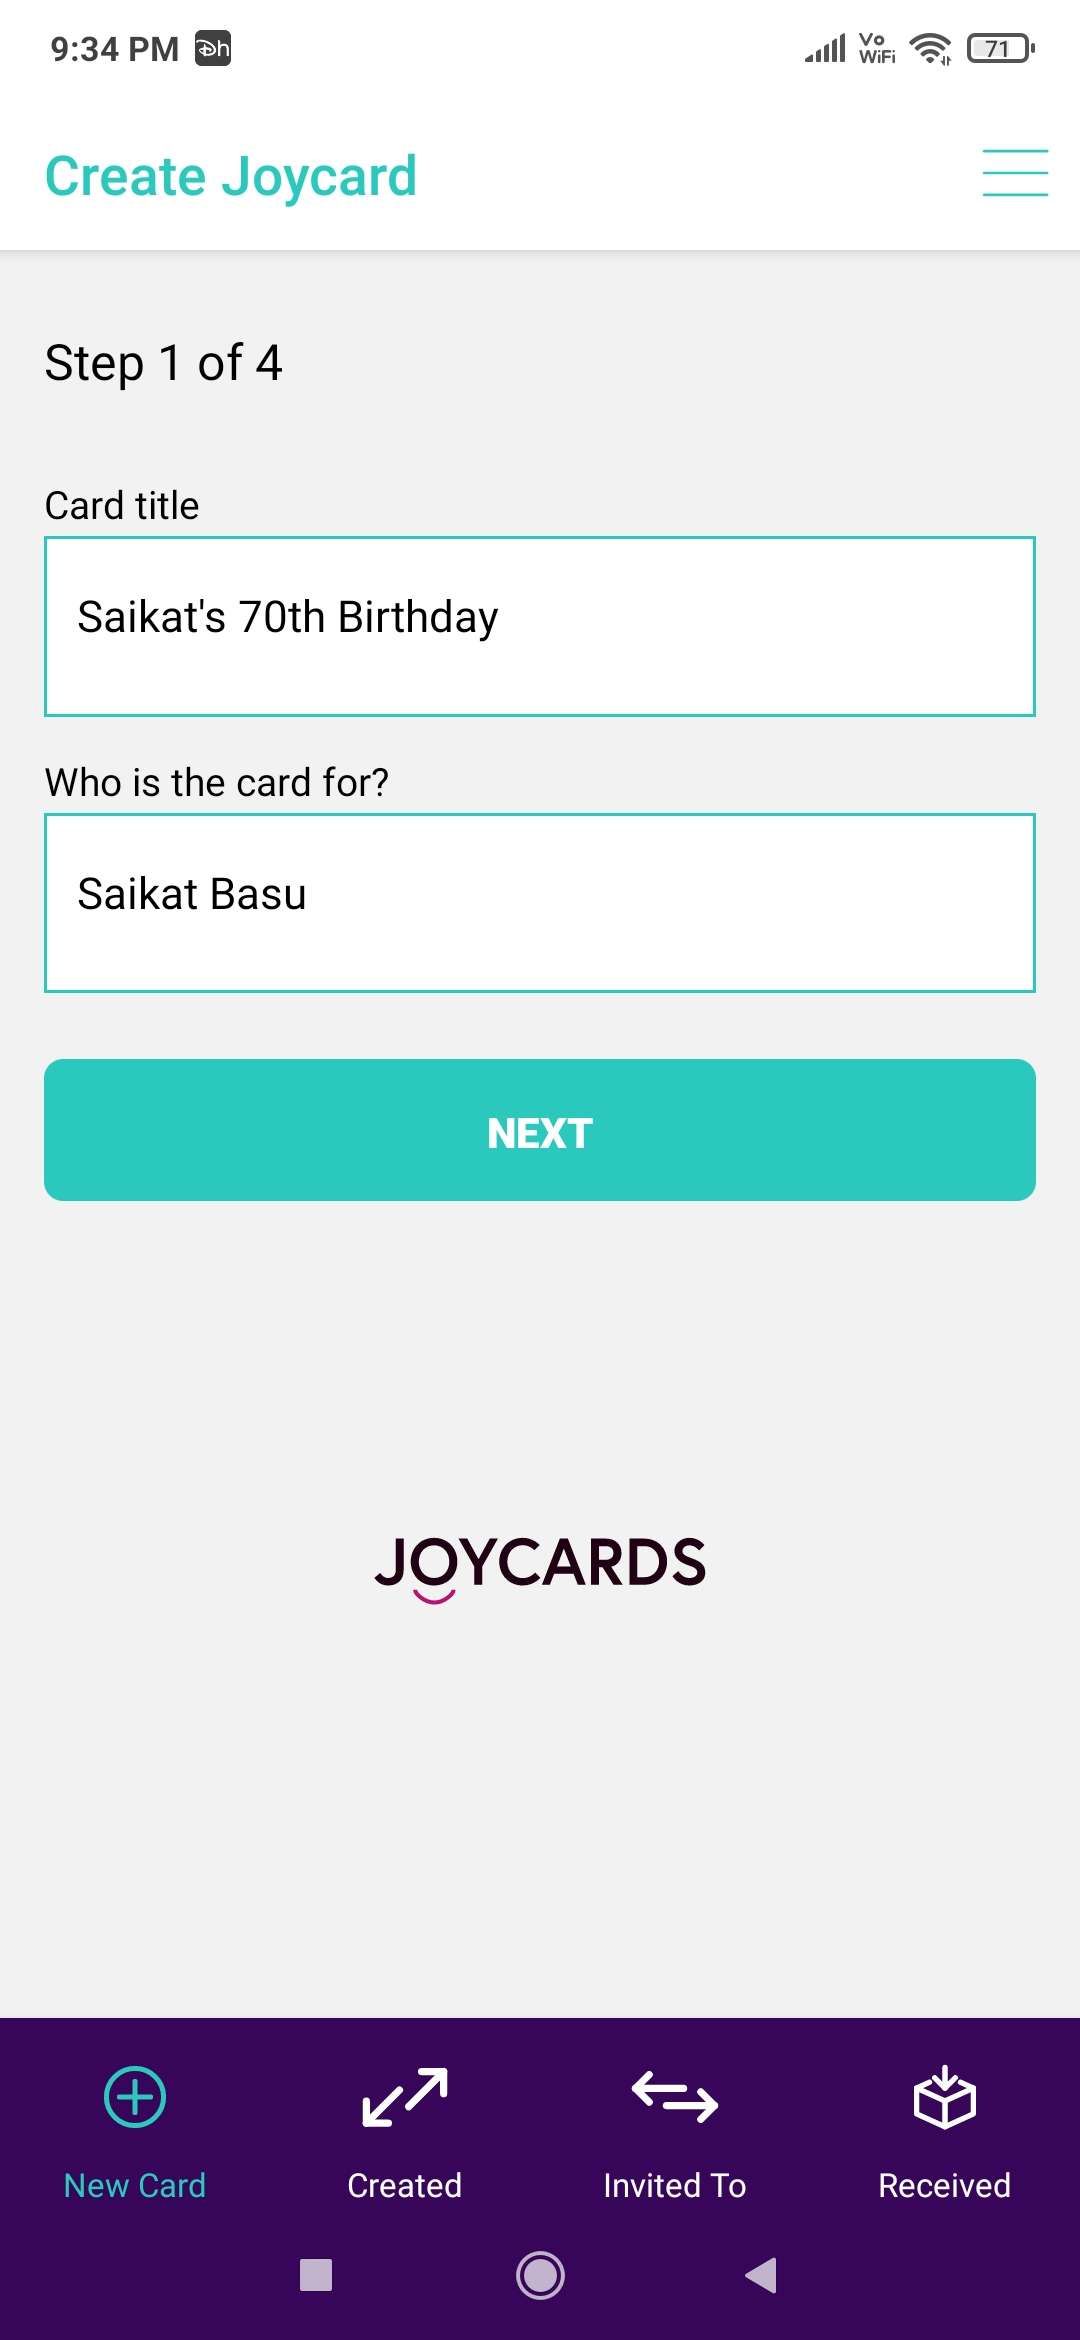 Joycards is a free app to create birthday cards by recording videos separately